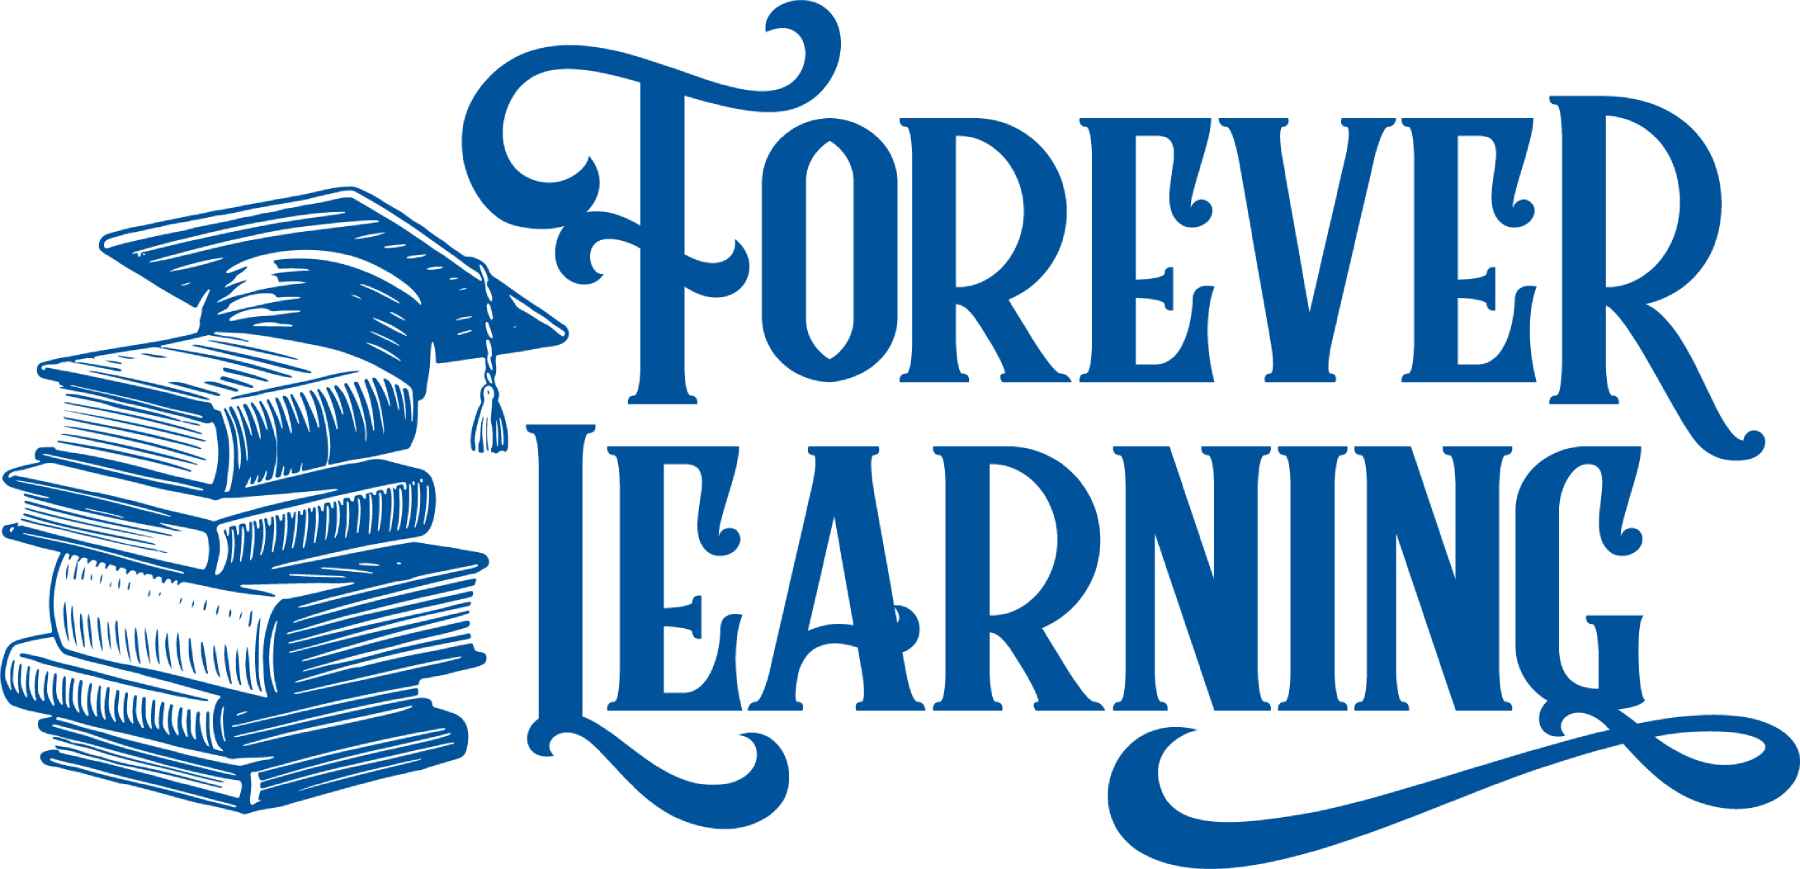 "Forever Learning" with a stack of books and a graduation cap.